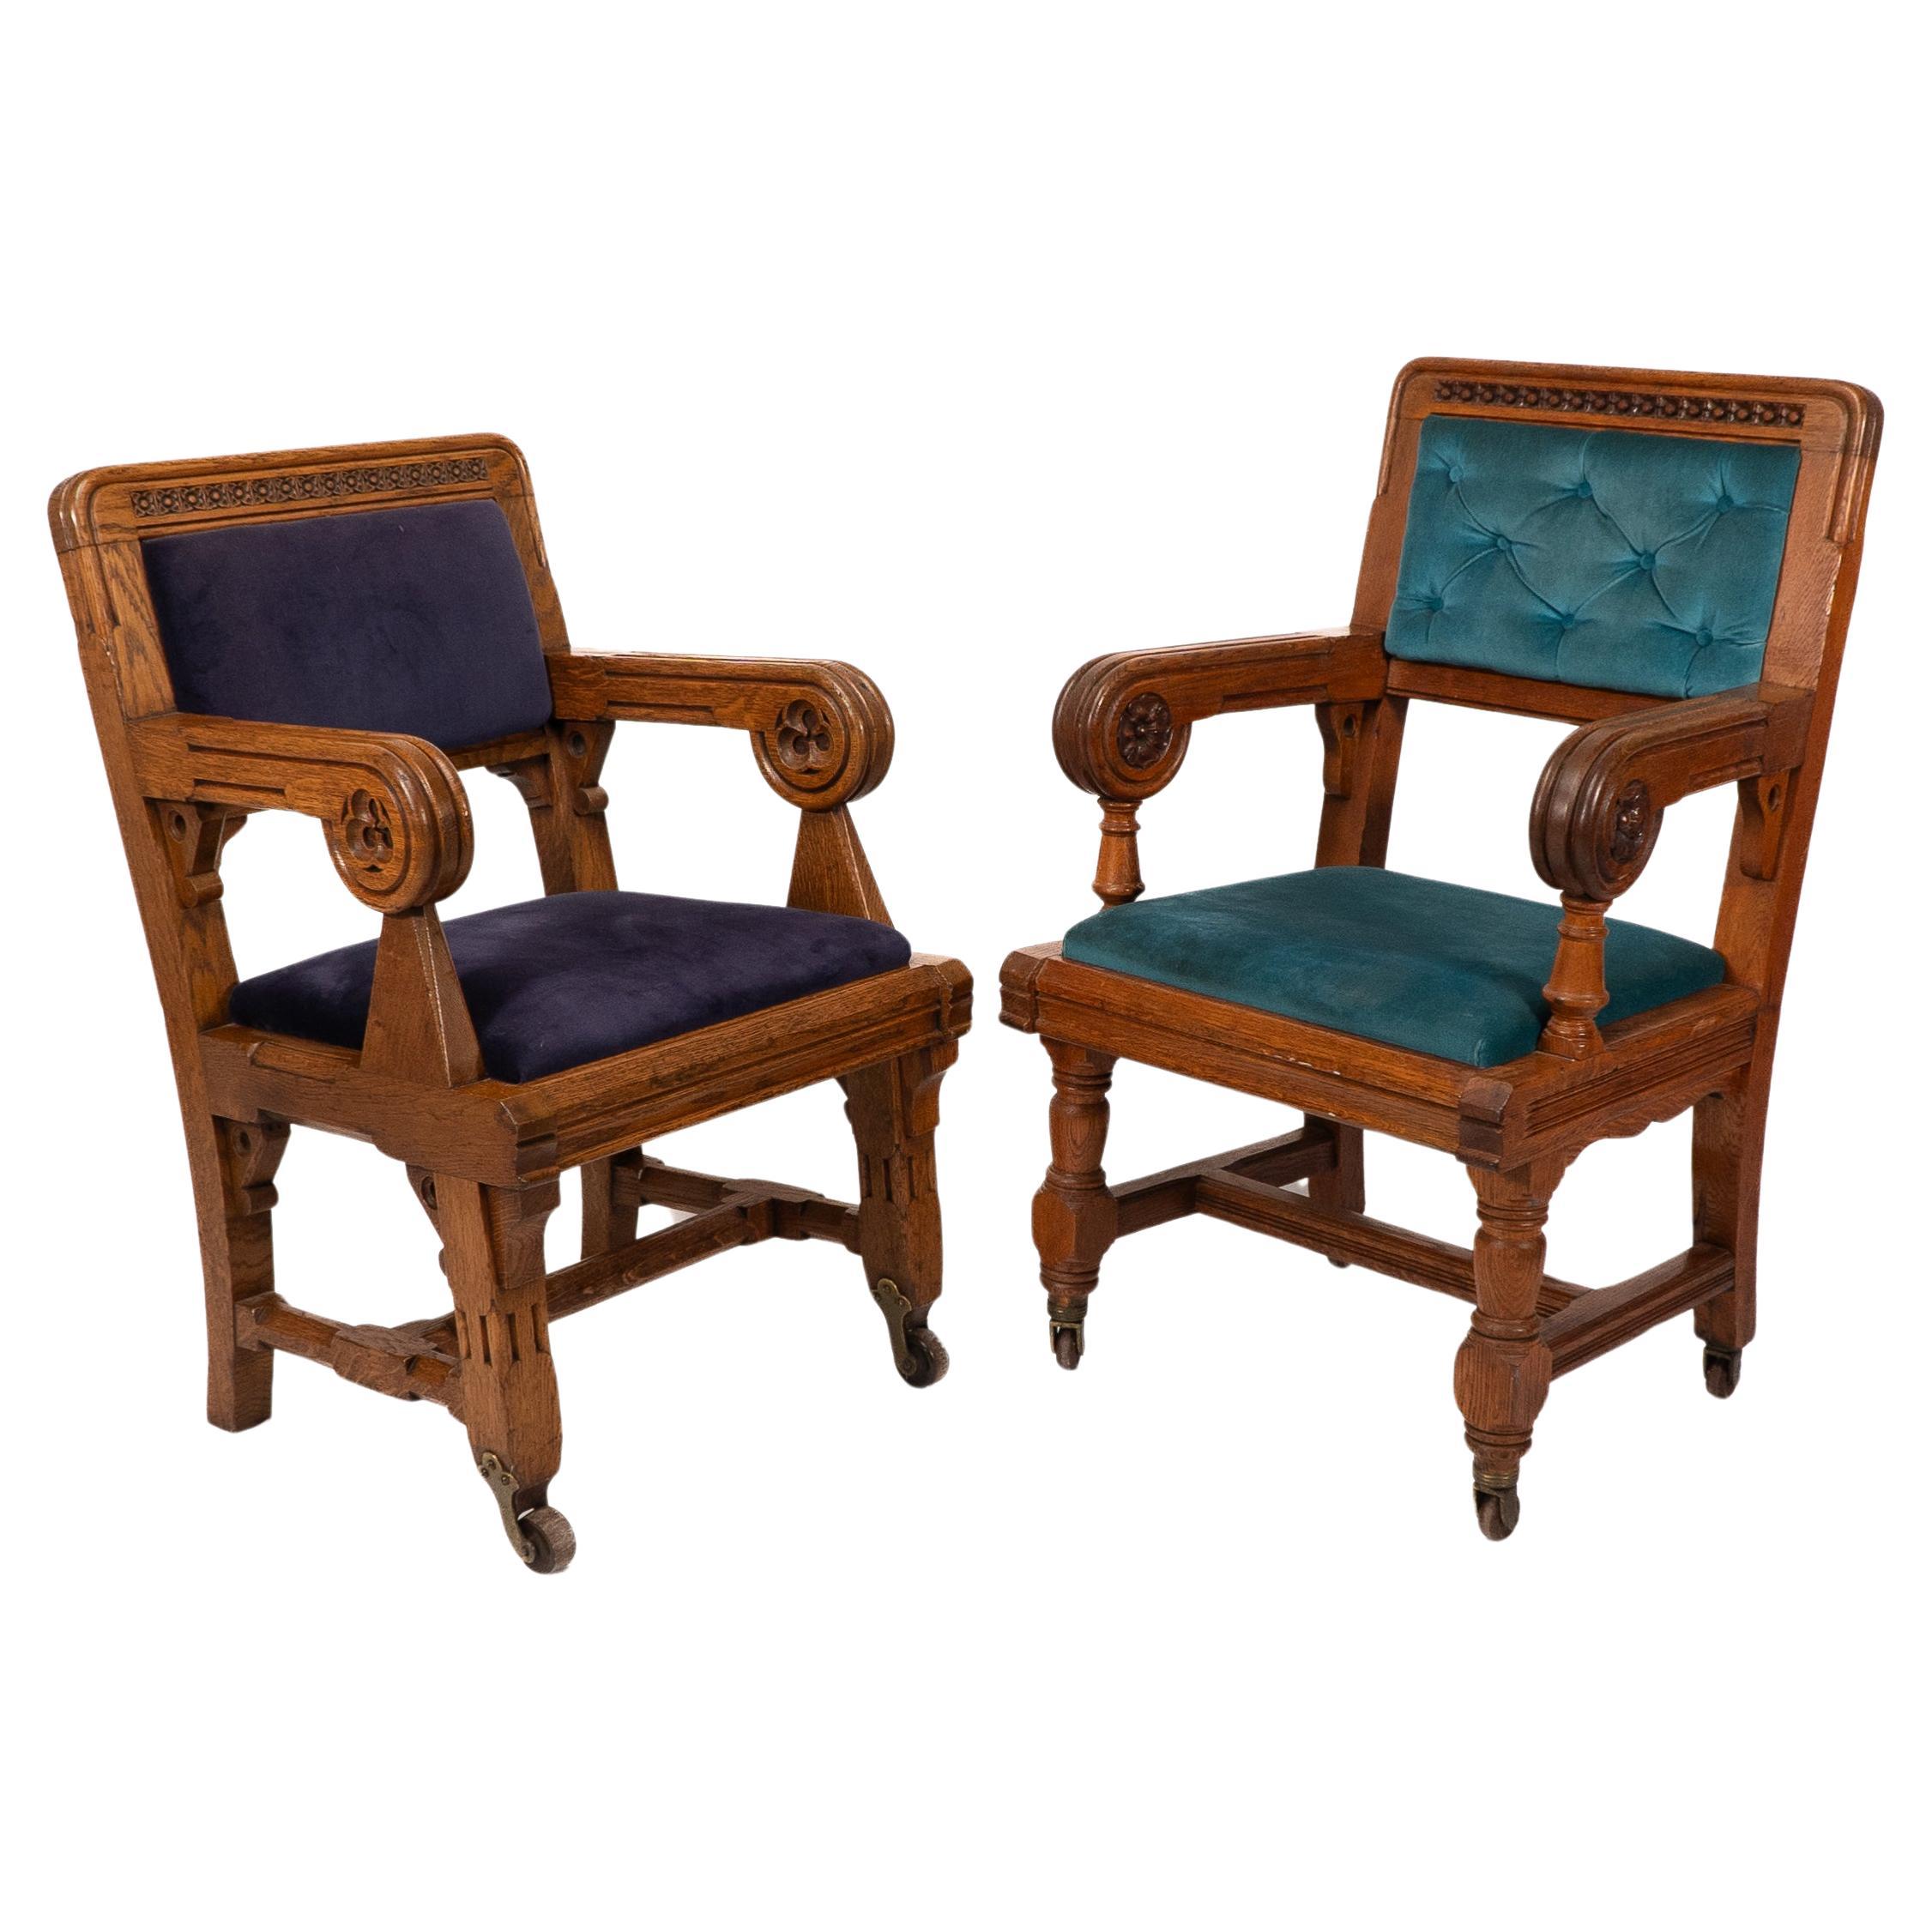 Bruce Talbert, Gillows, Two Rare Gothic Revival Oak Armchair in Blue Upholstery. For Sale